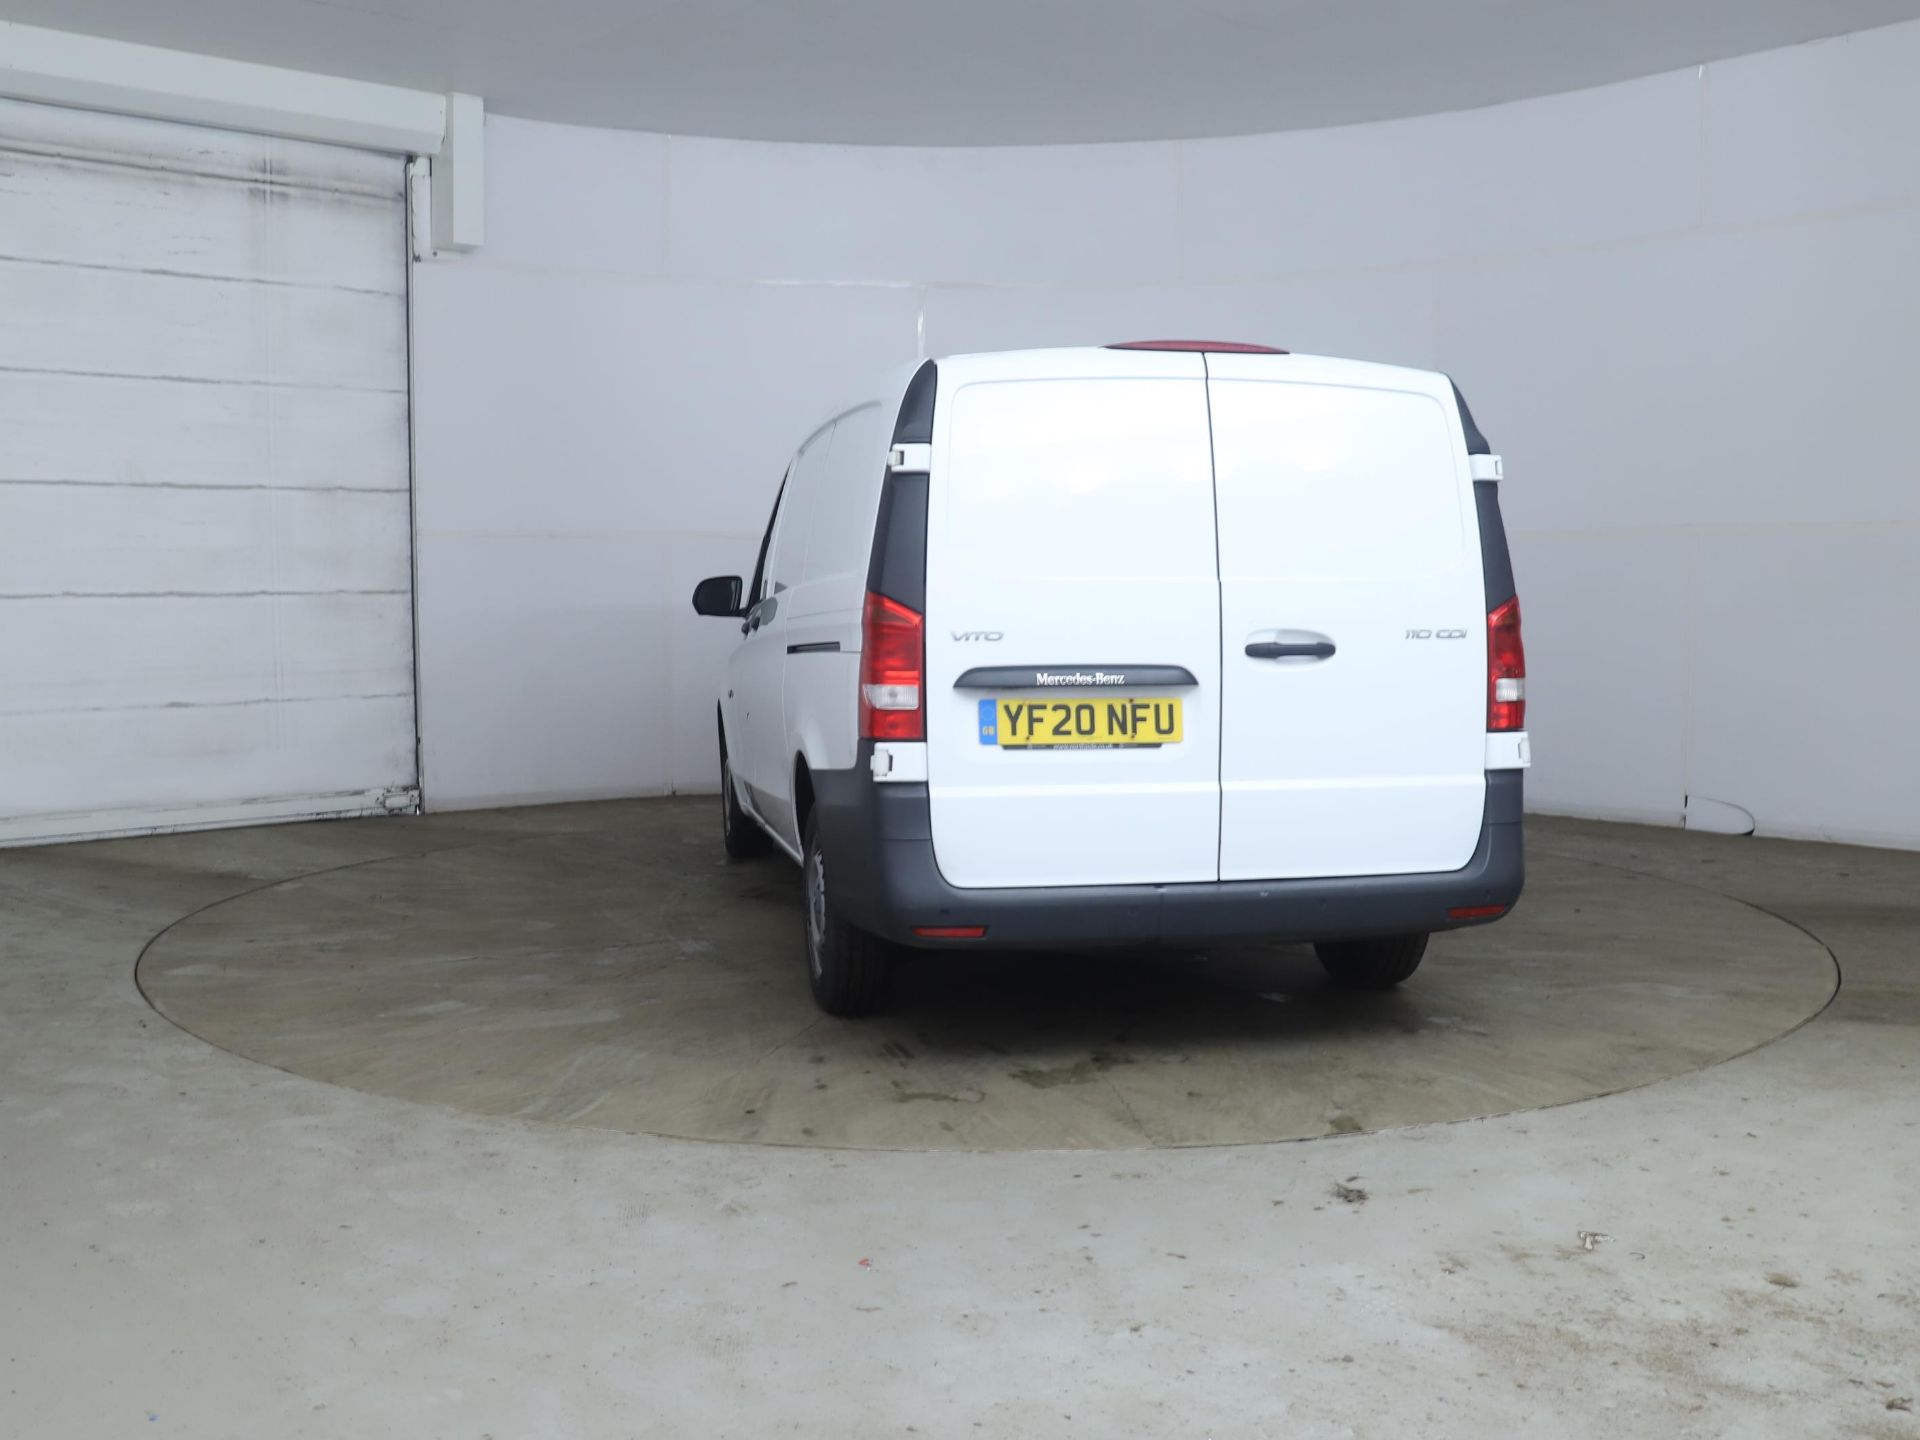 MERCEDES BENZ VITO CDI PURE - 2020 20 Reg - Only 74k Miles - 1 Owner From New - Parking Sensors - Image 5 of 12